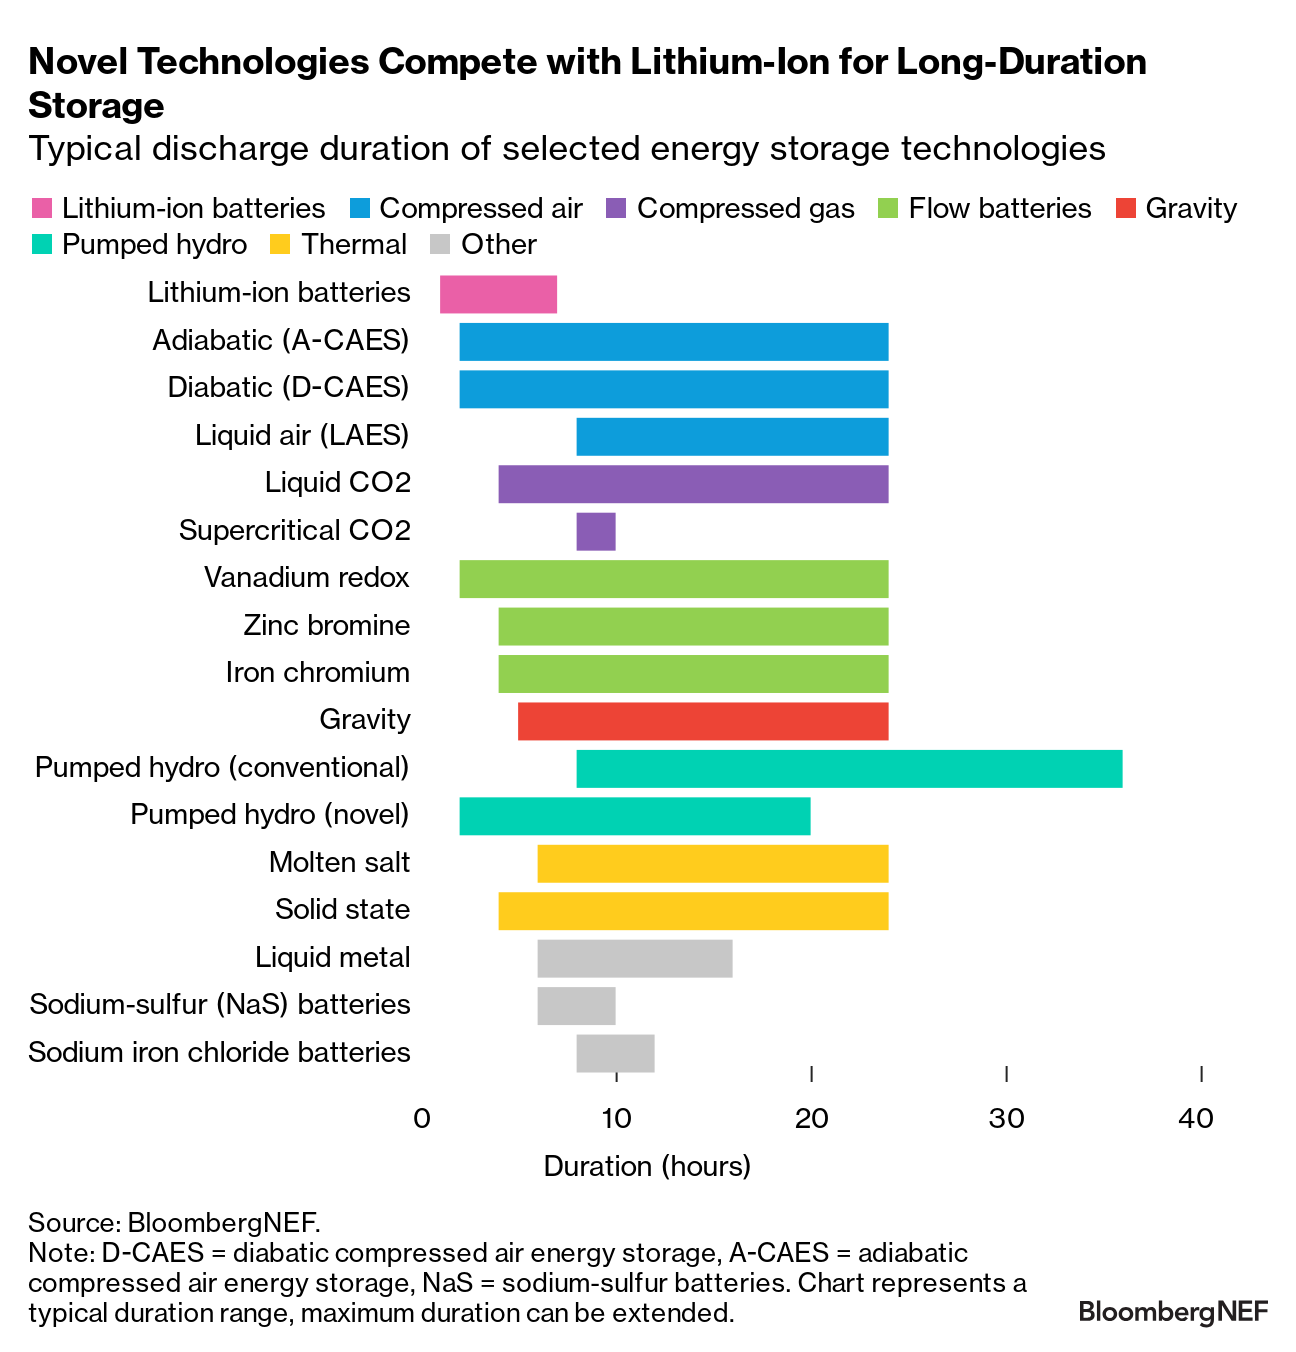 Typical discharge duration of select energy storage technologies